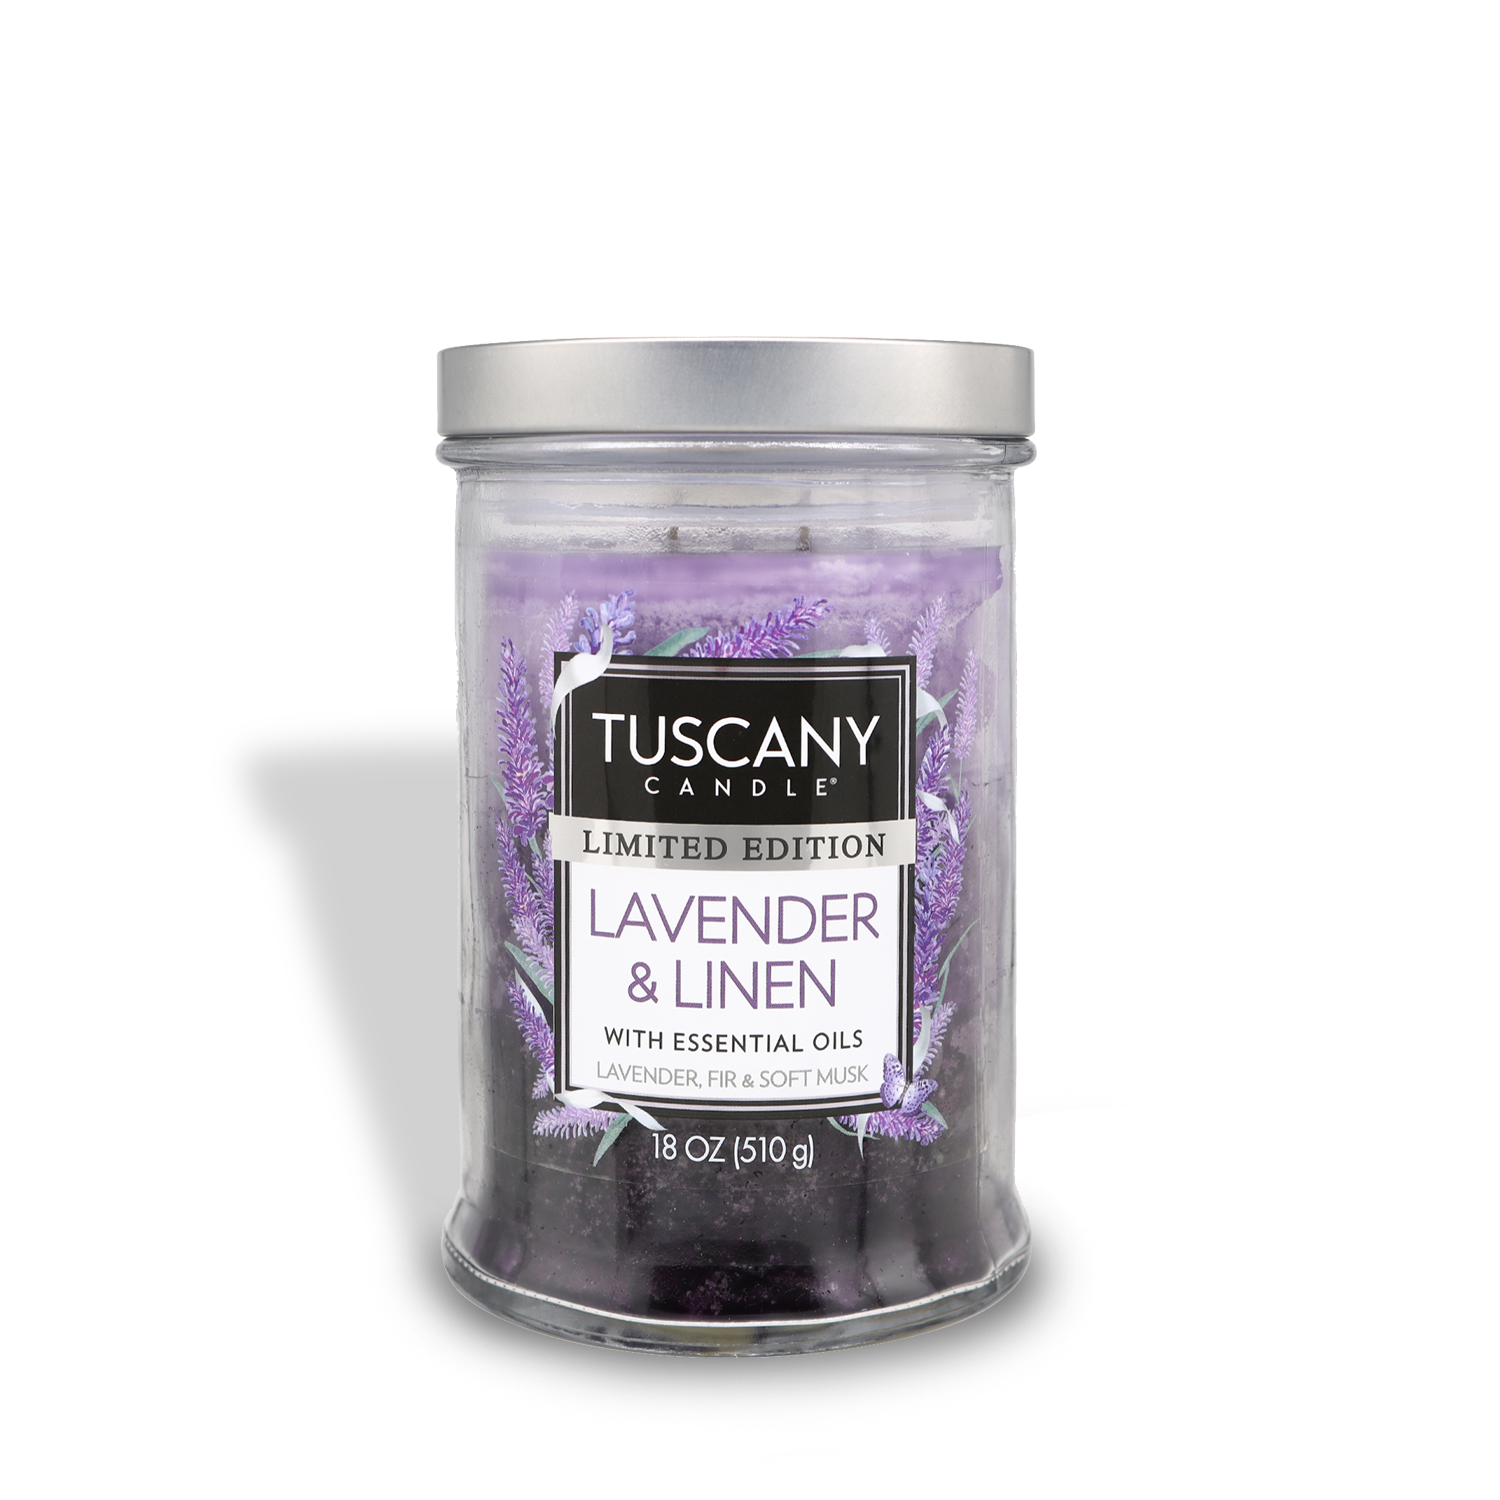 A Lavender Linen Long-Lasting Scented Jar Candle (18 oz) by Tuscany Candle® SEASONAL.